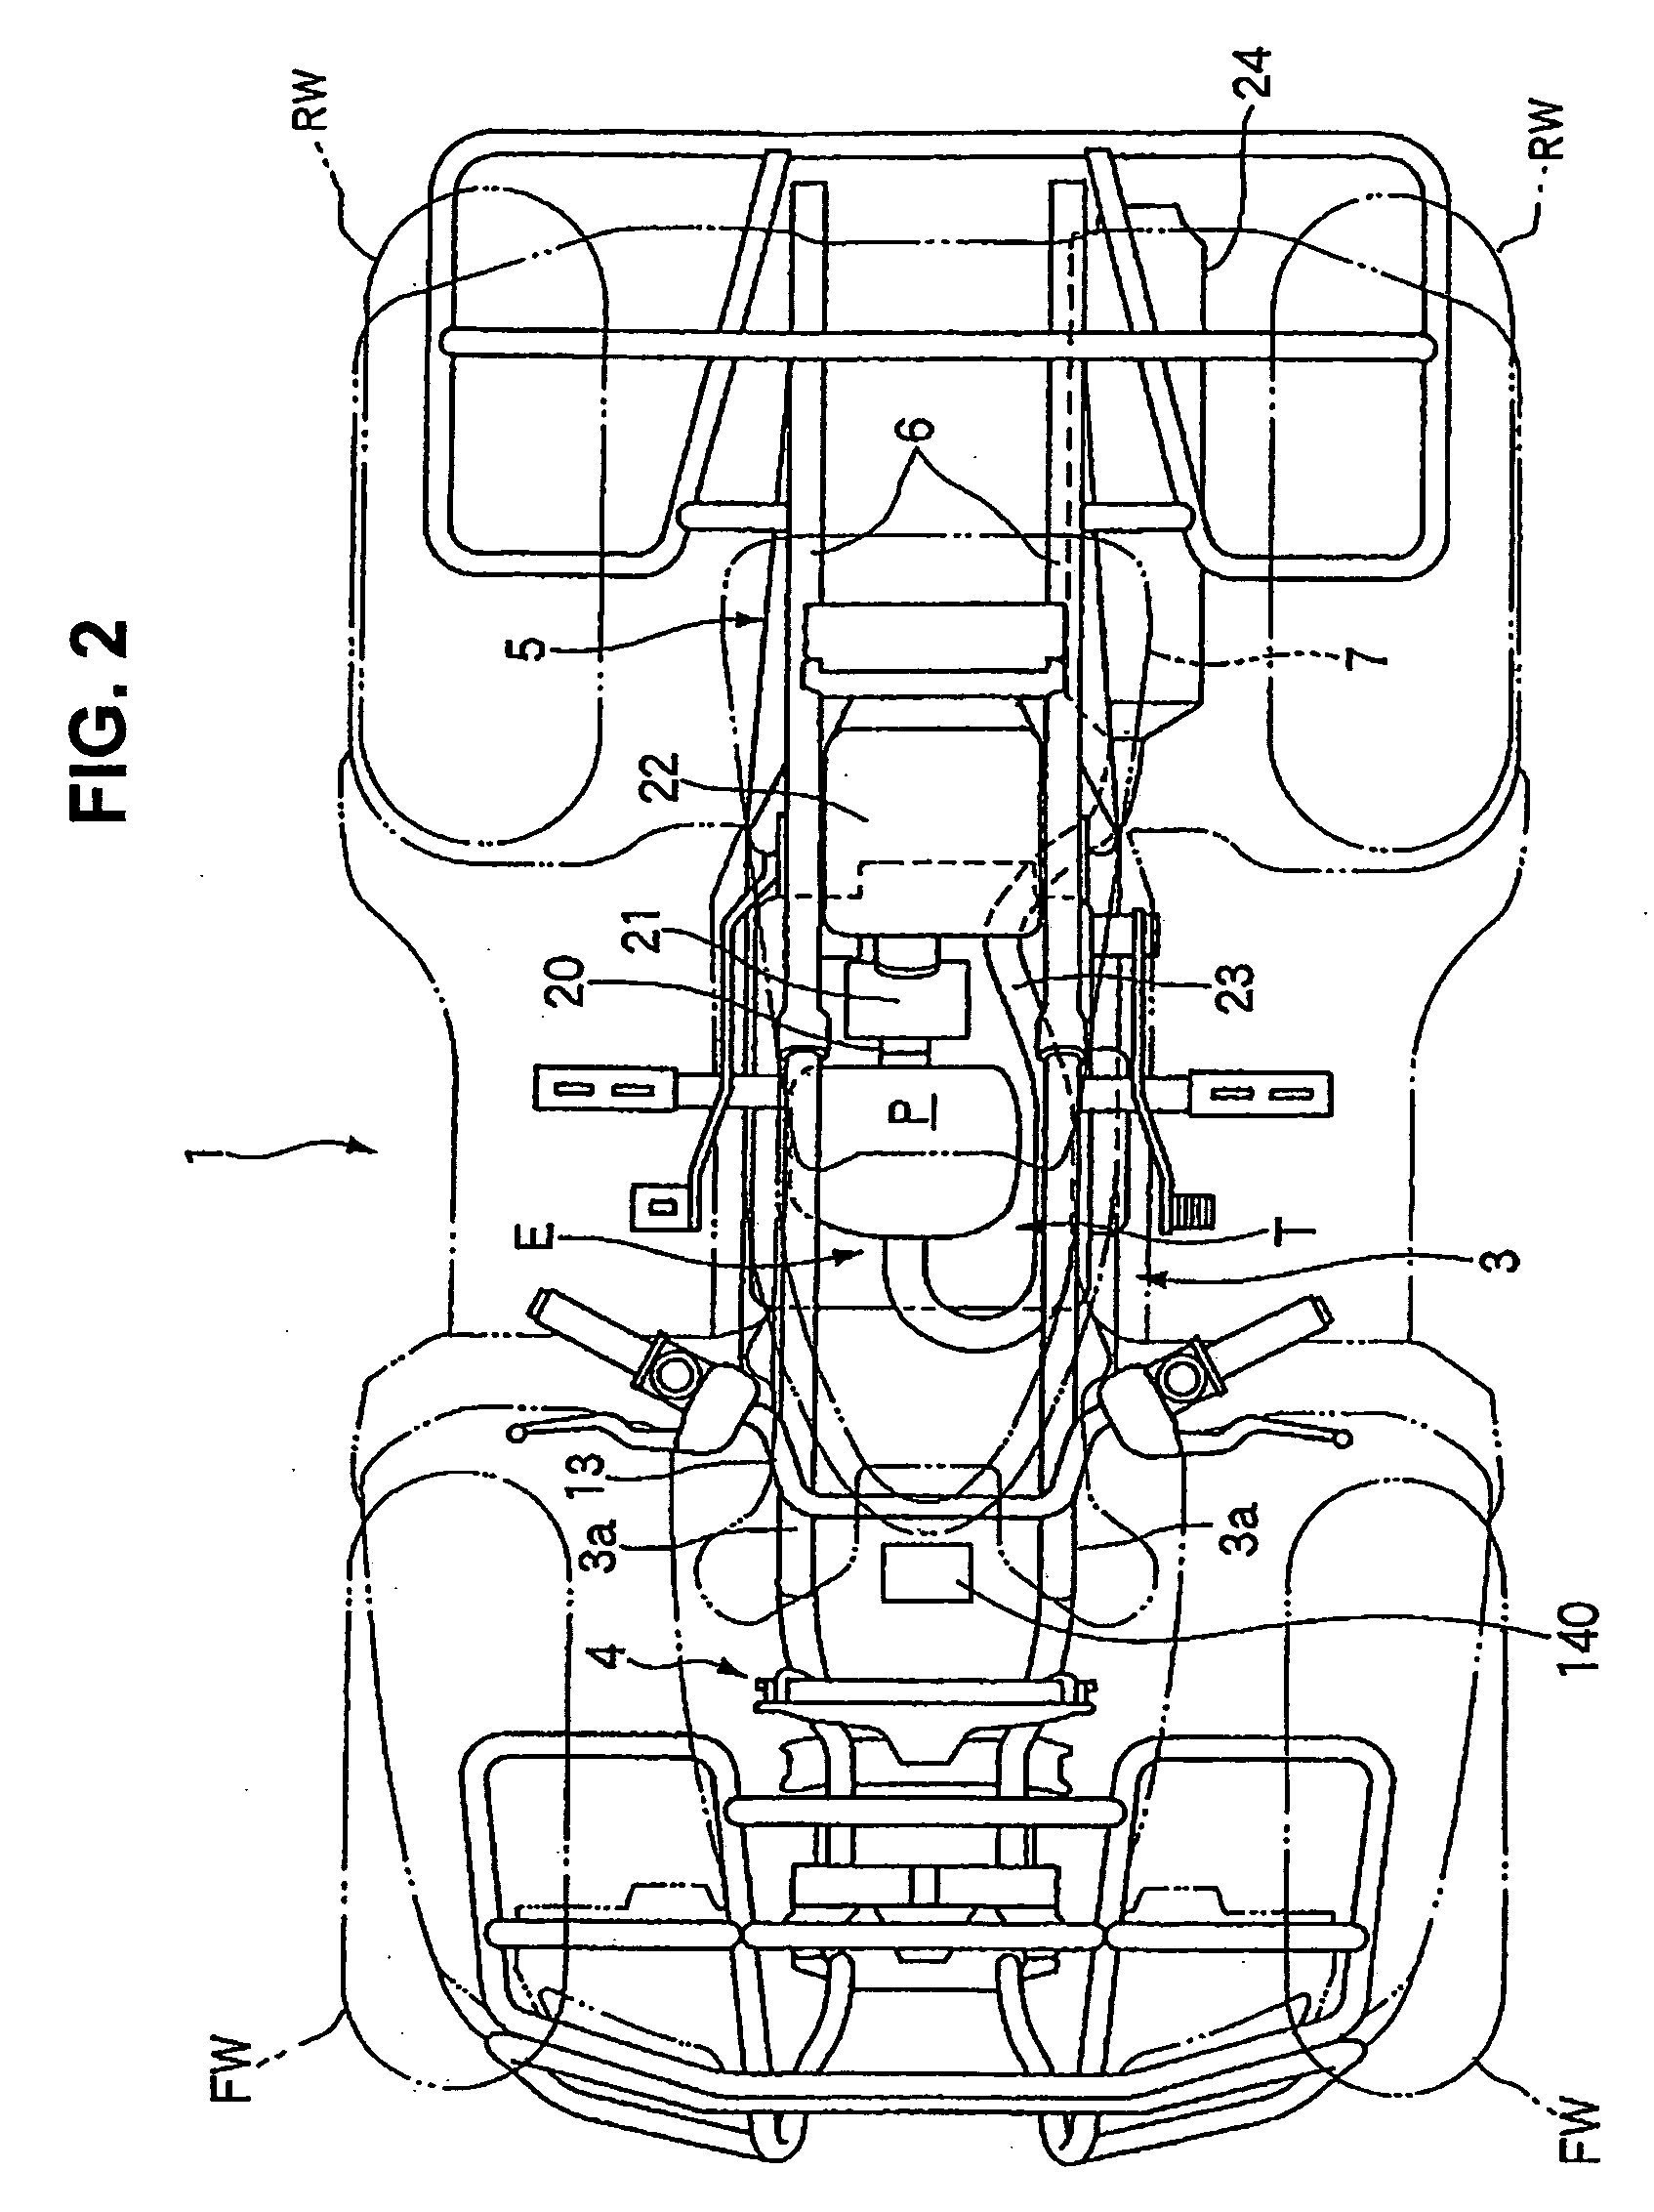 Engine starting system and method